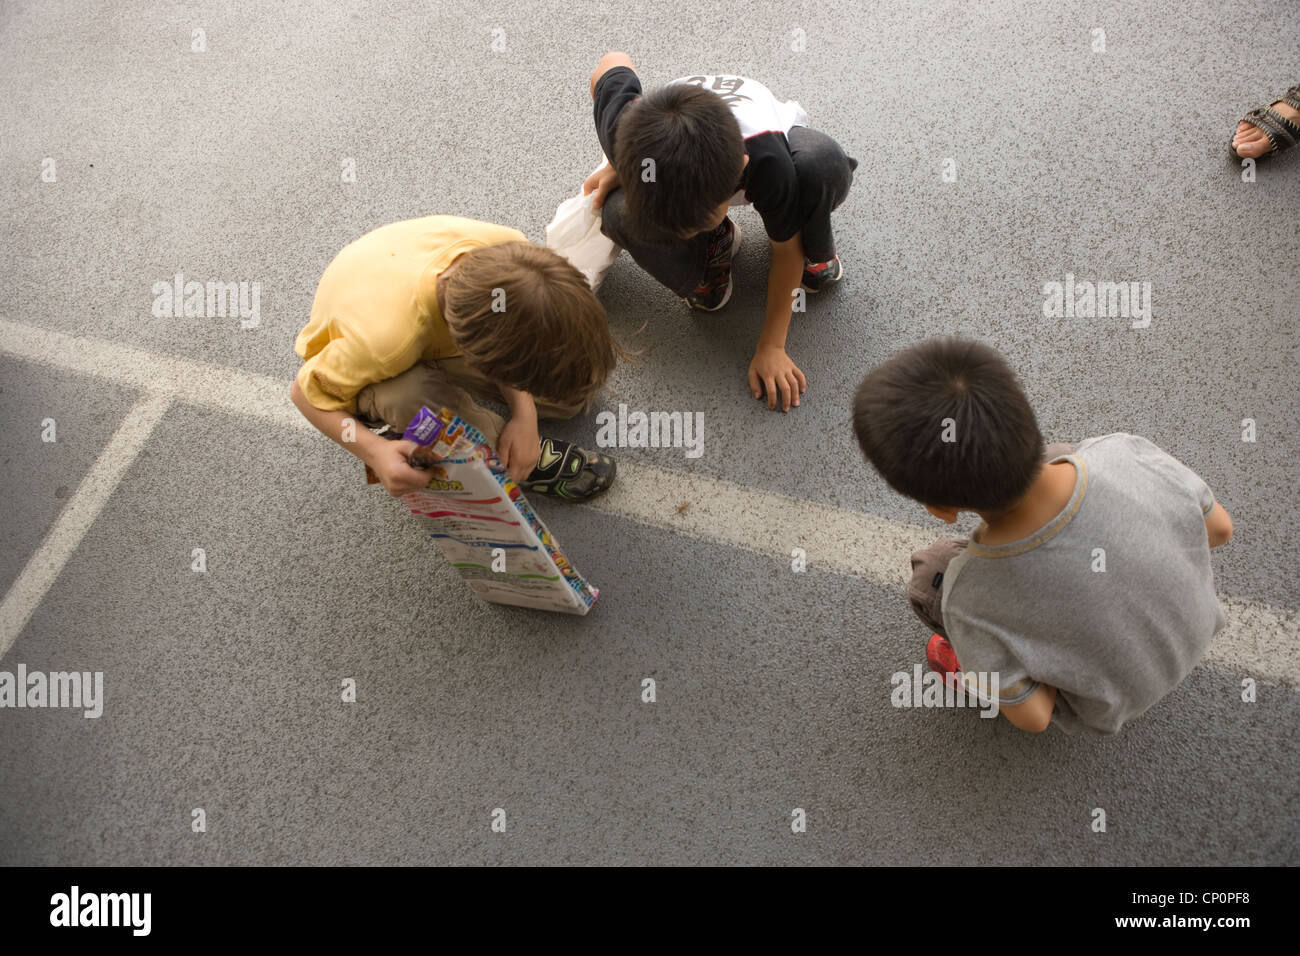 Three boys squat down in a parking lot to study an insect walking. Stock Photo